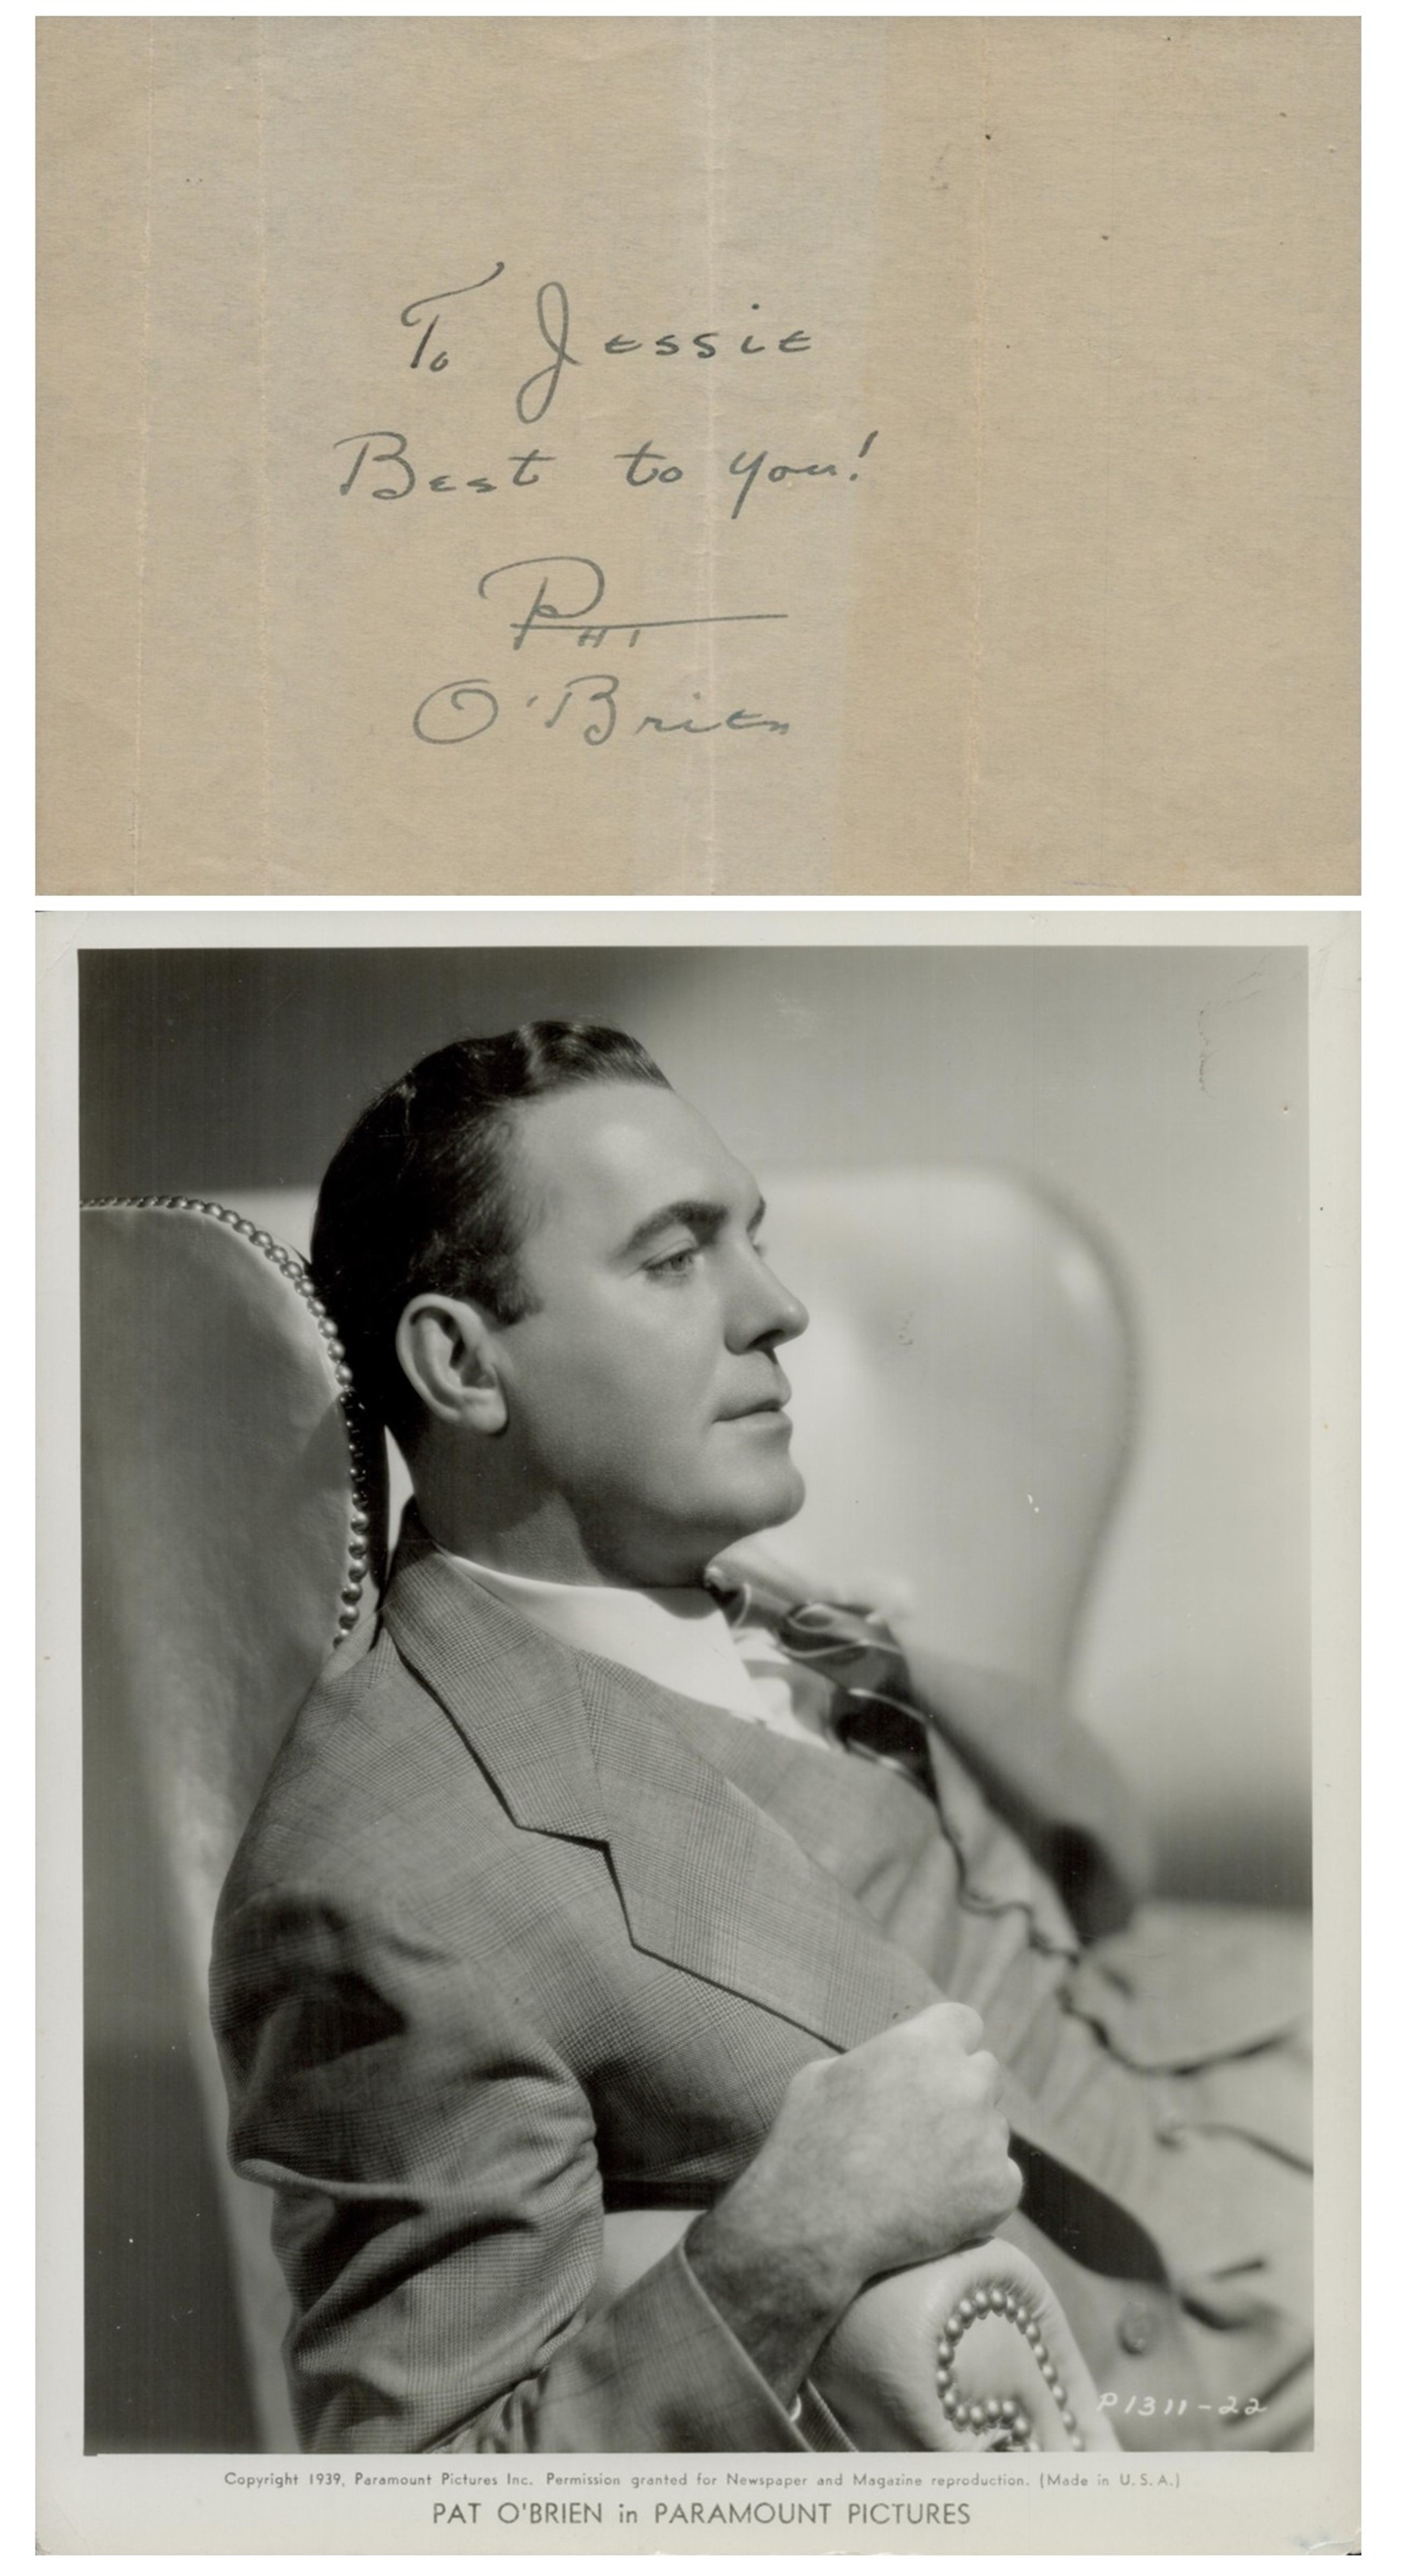 Pat O'Brien signed Autograph page 6x4 Inch plus Unsigned vintage Promo. Black and White Photo 10x8